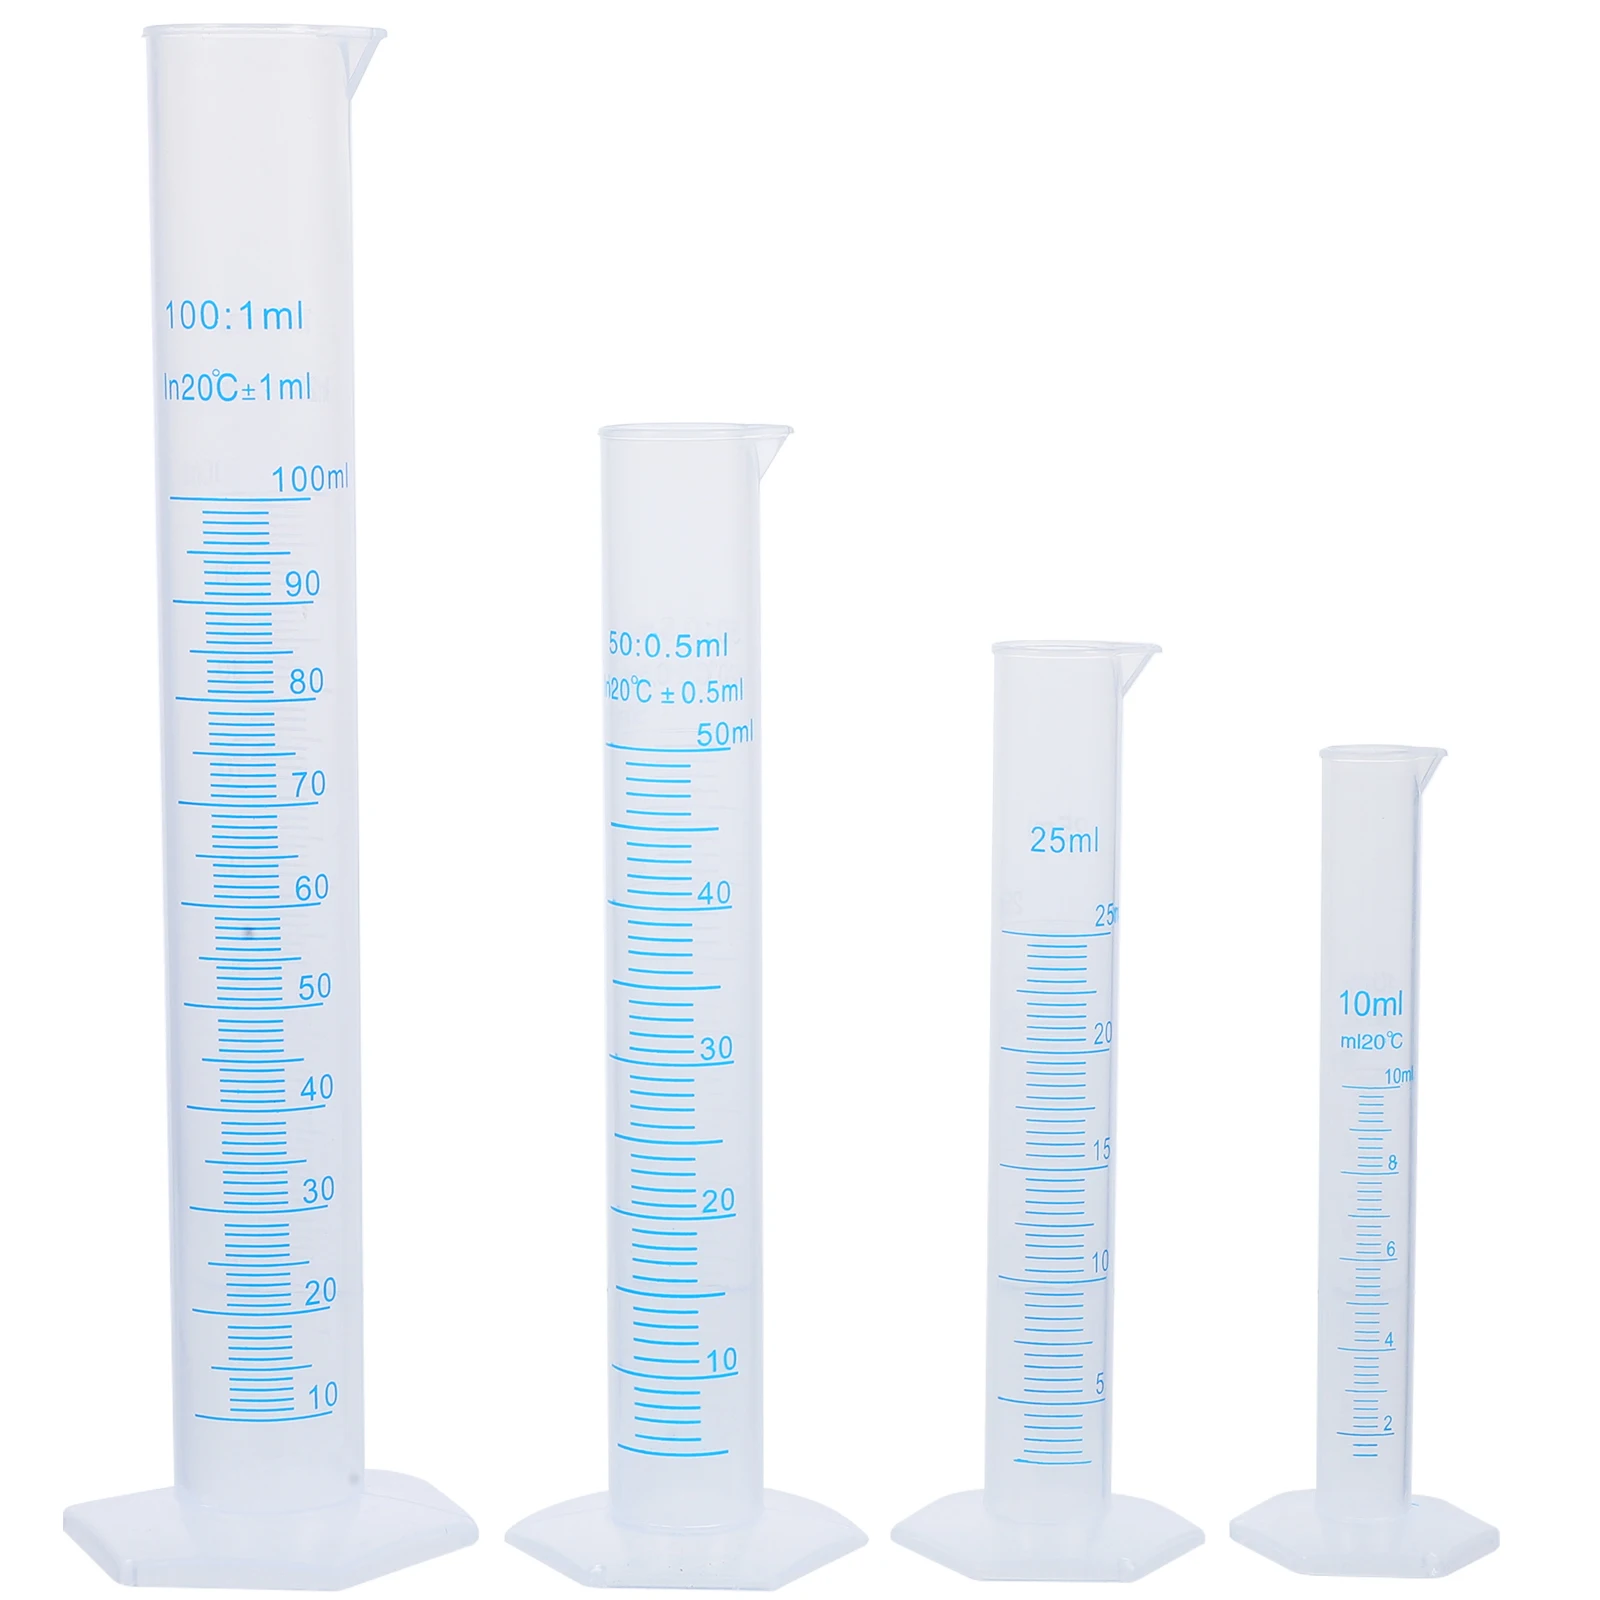 

4pcs Cylinder Delicate Well Design Useful Exquisite Measuring Cylinder for Student Teacher Laboratory-Specific Supplies